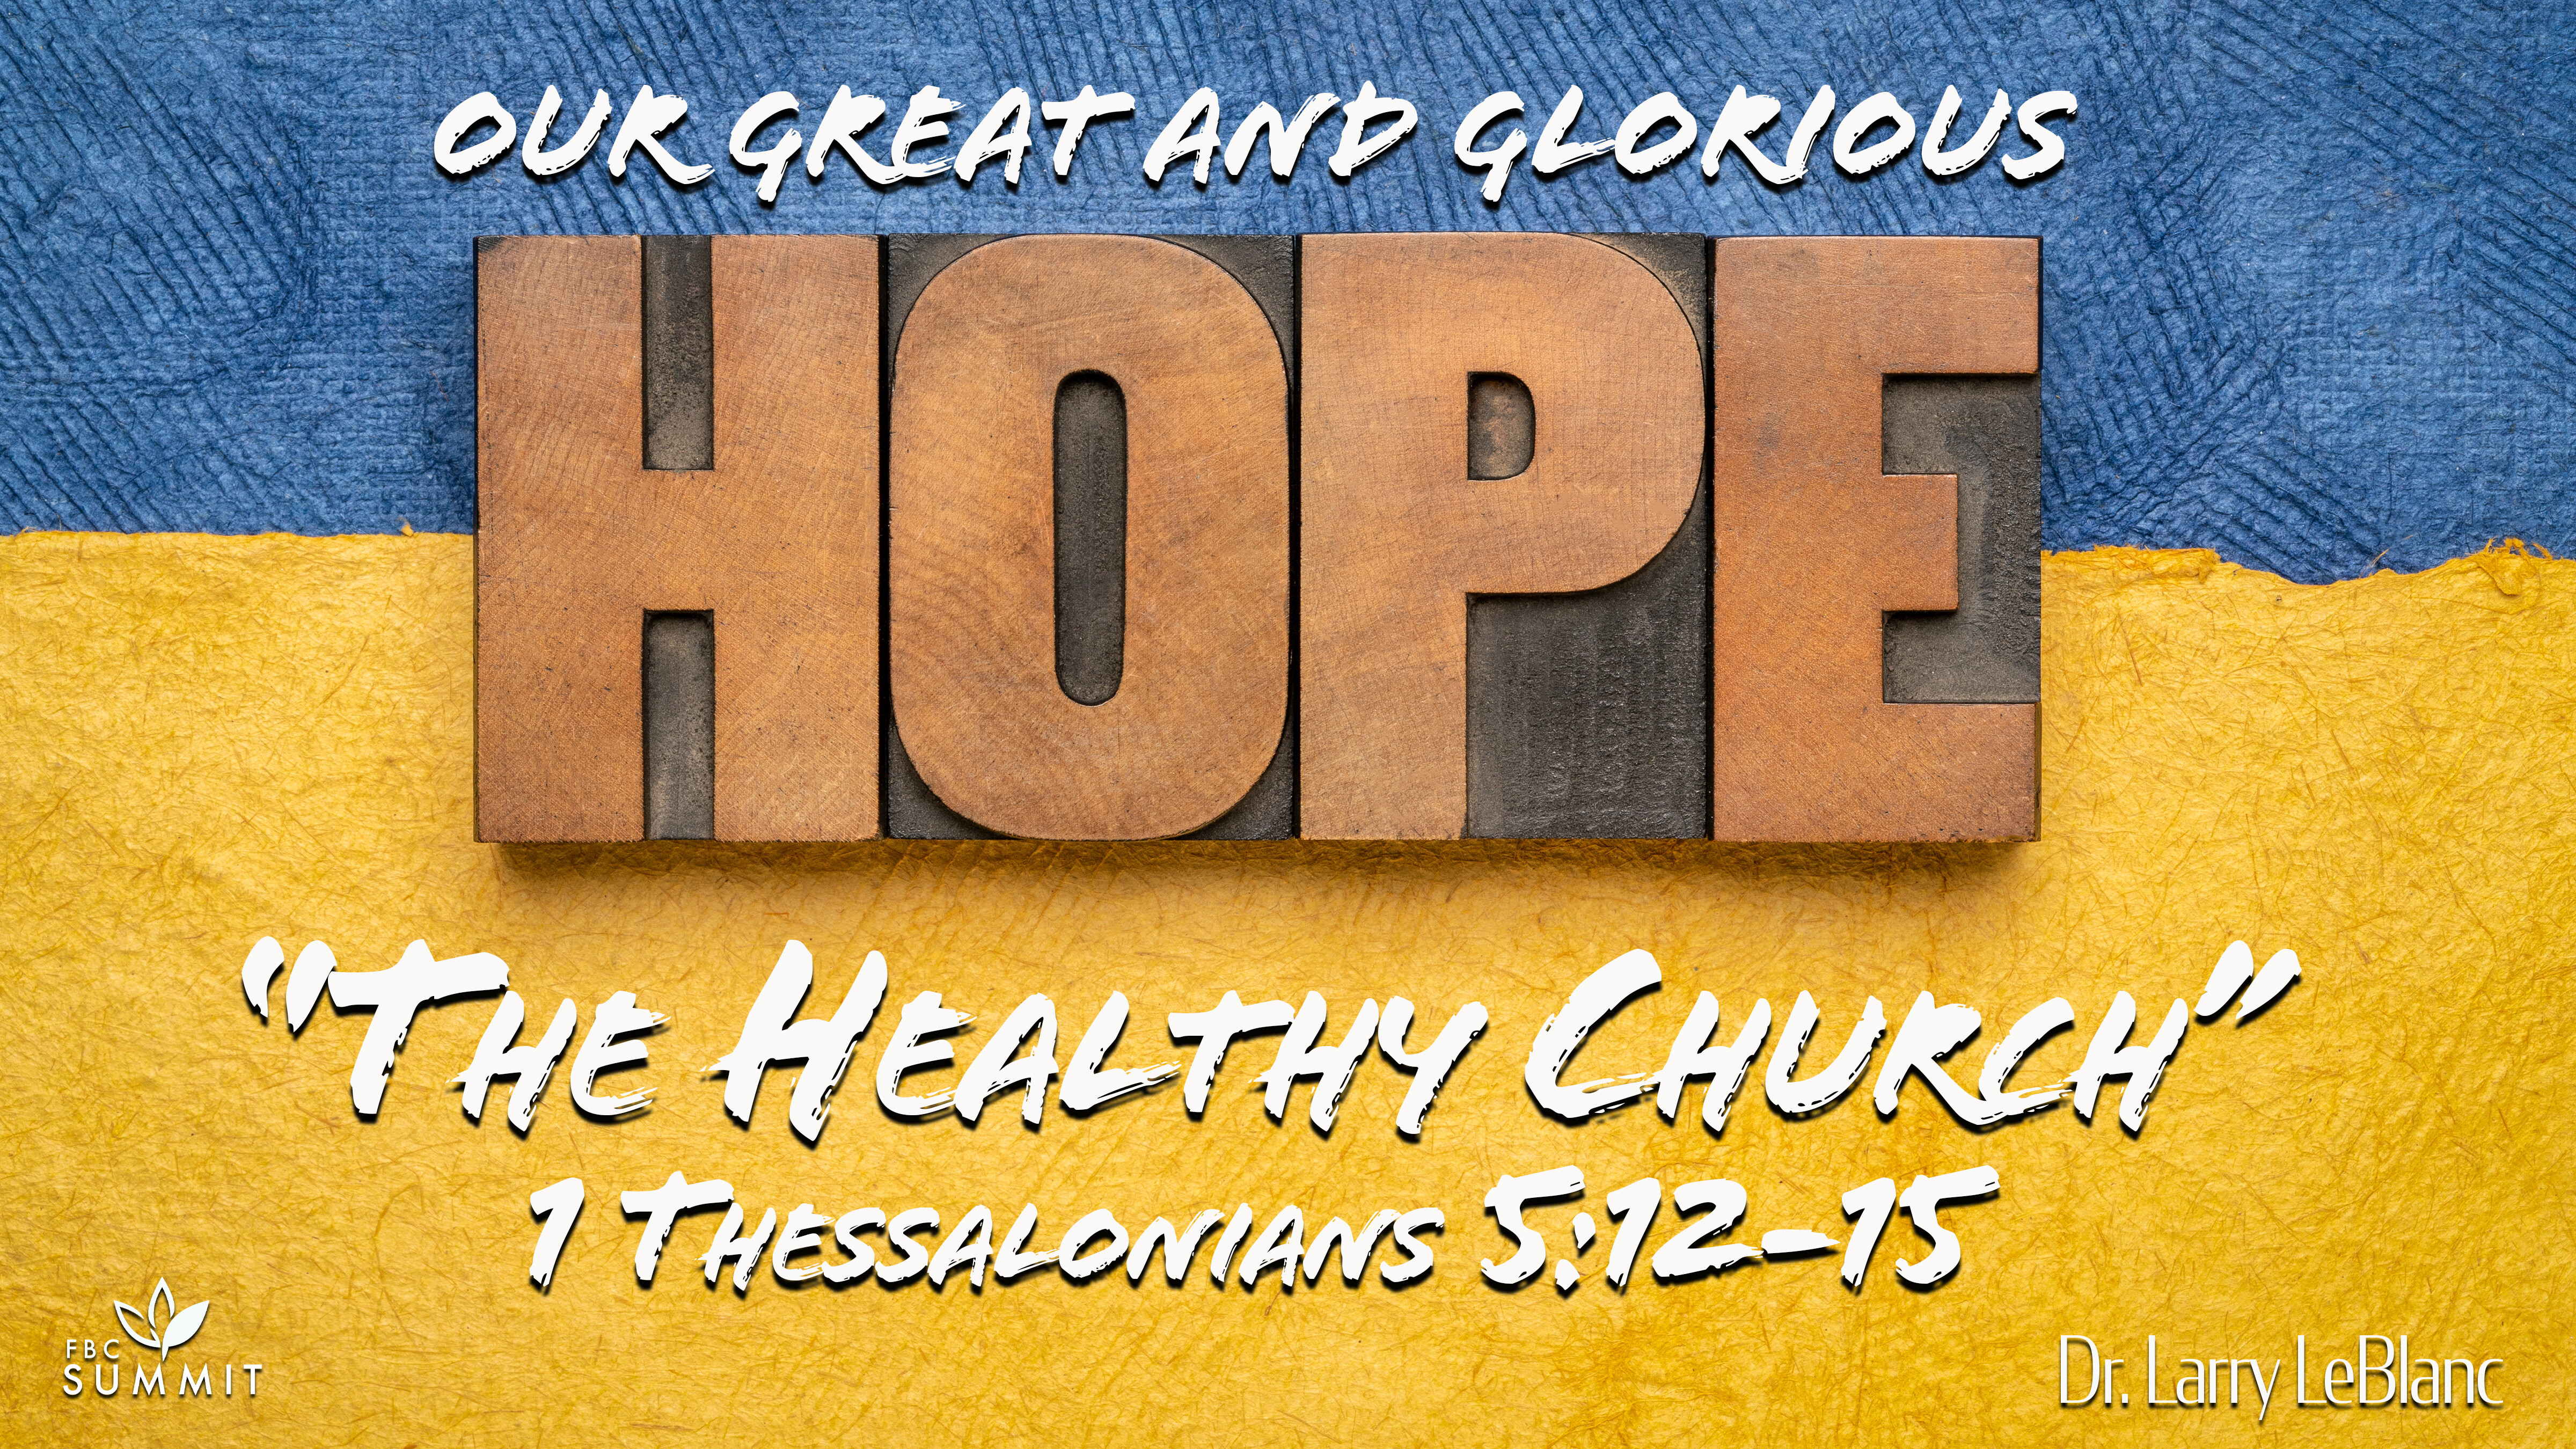 "The Healthy Church" 1 Thessalonians 5:12-15 // Dr. Larry LeBlanc